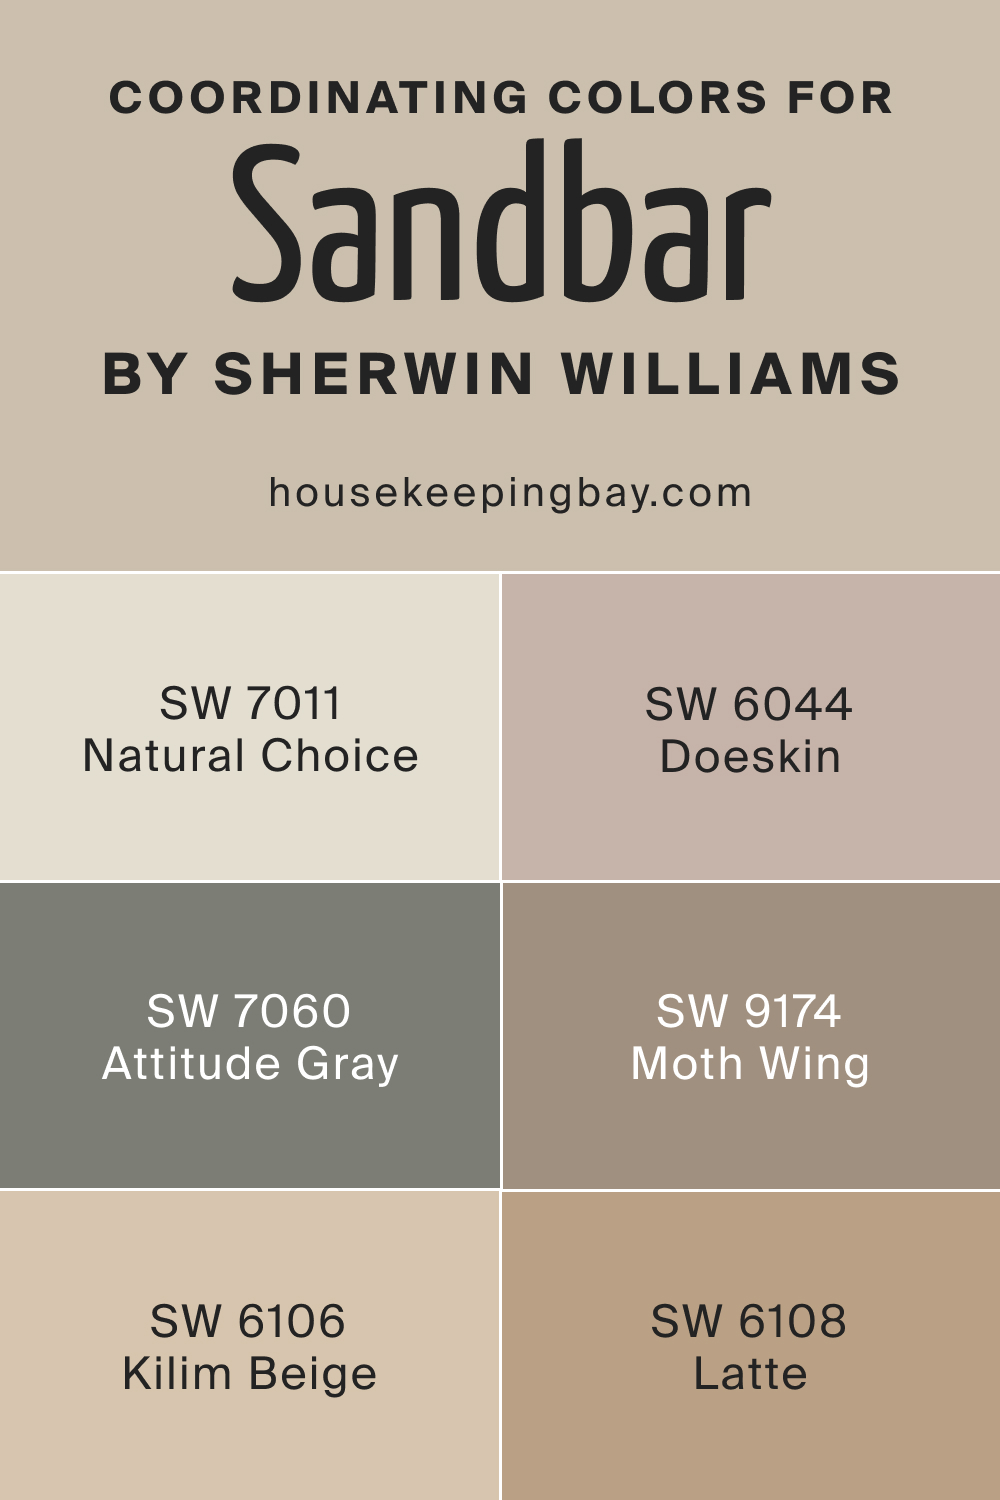 Coordinating Colors for SW 7547 Sandbar by Sherwin Williams